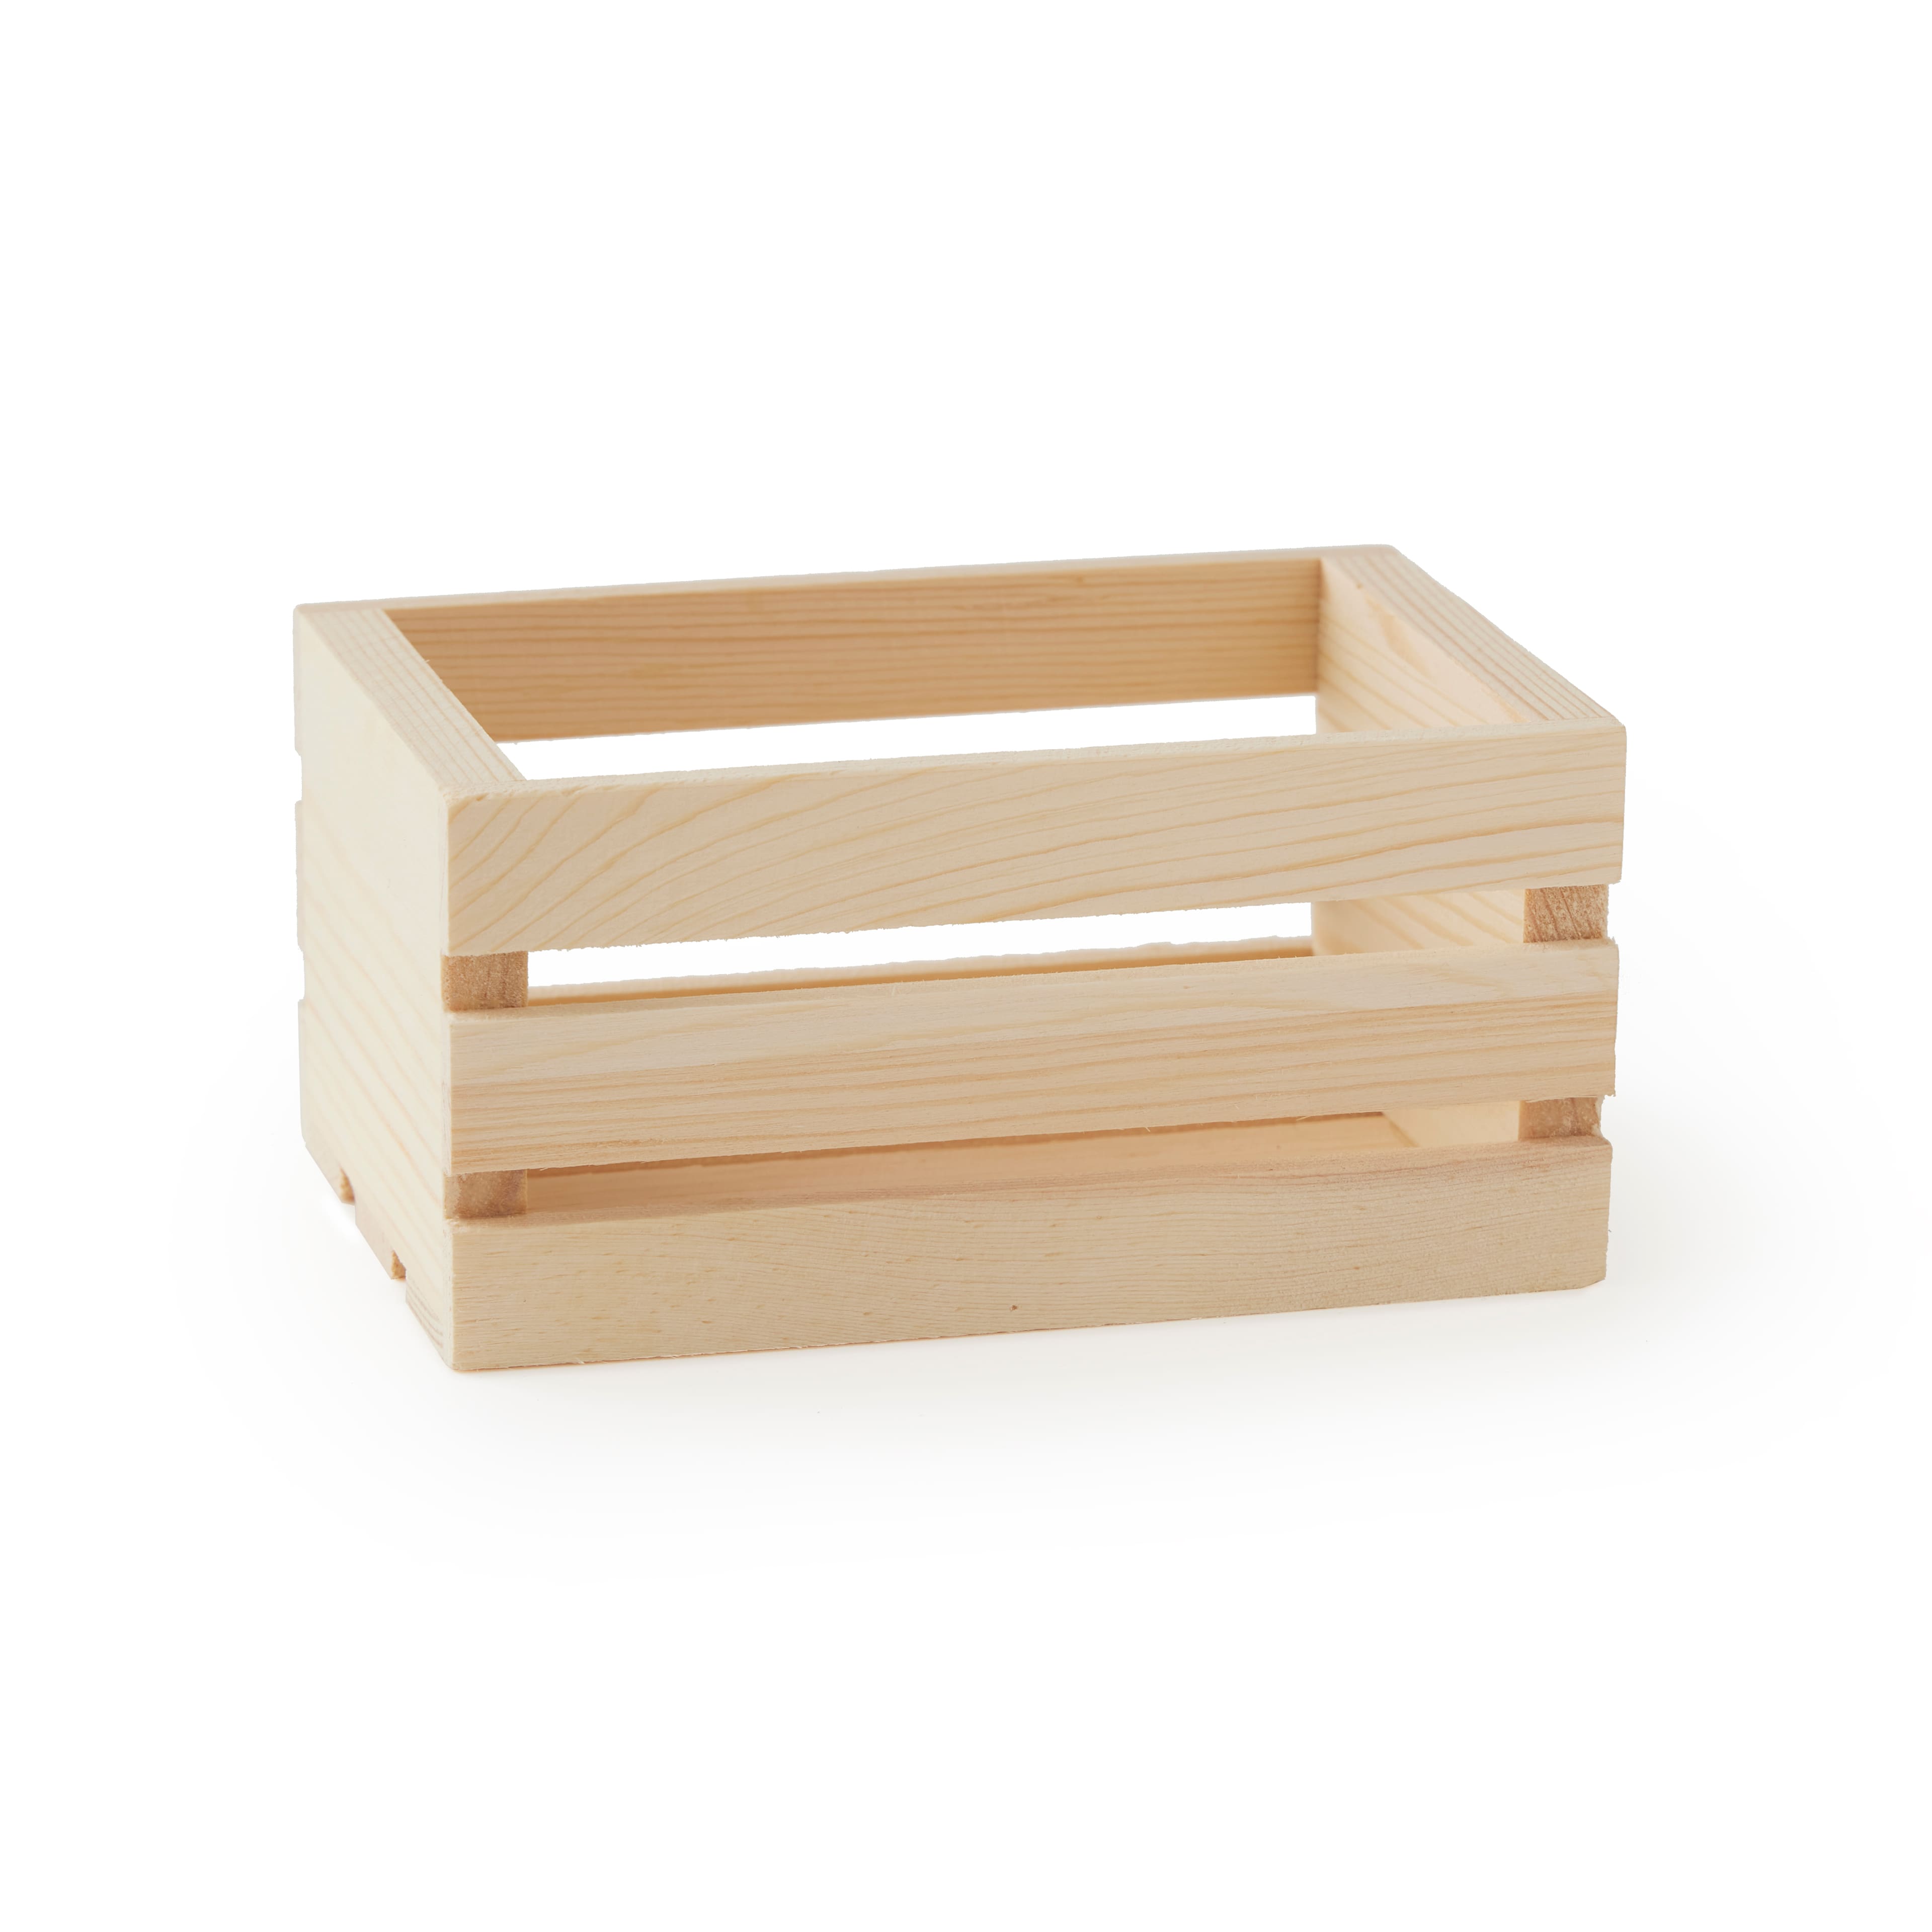 Mini Small Plain Wooden Fruit Crates Containers in 2 Sizes/ Tiny Storage Box 